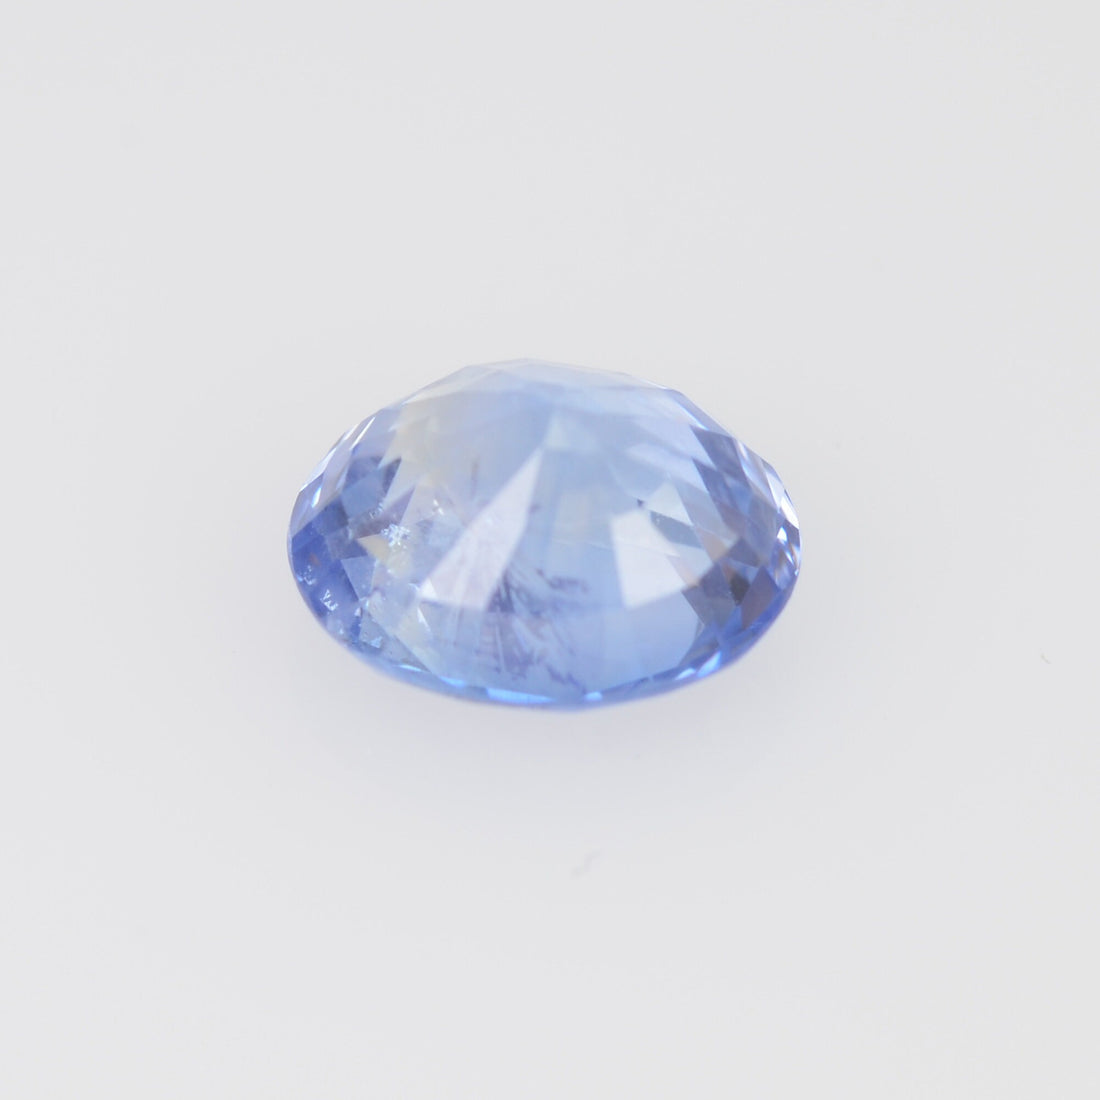 6x4 mm Natural Pastel Blue Sapphire Loose Gemstone oval Cut